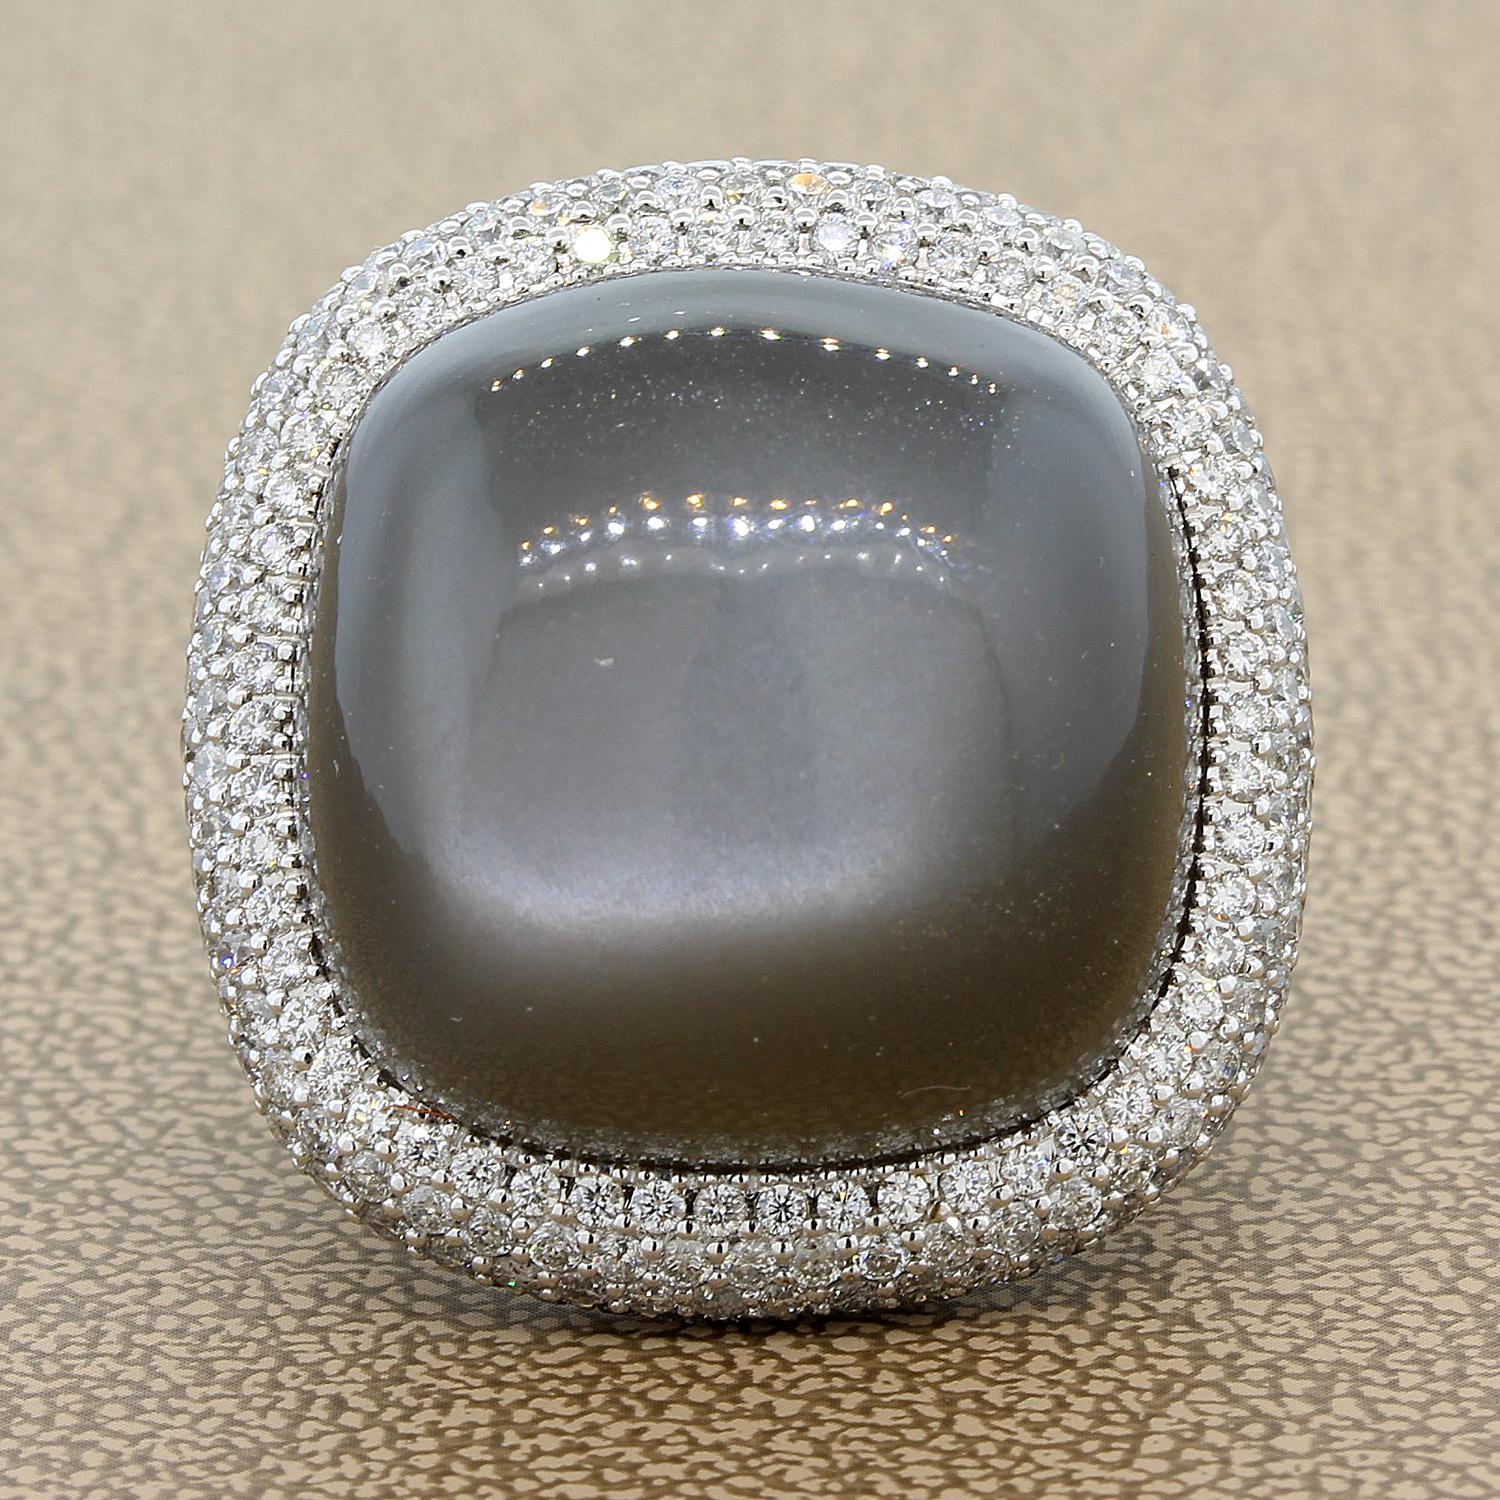 An impressive cocktail ring featuring an impressive moonstone weighting 55.70 carats. Accenting the center stone are 6.11 carats of round cut diamonds covering the entire ring. Set in 18K white gold. 
A bold look for a woman who knows what she